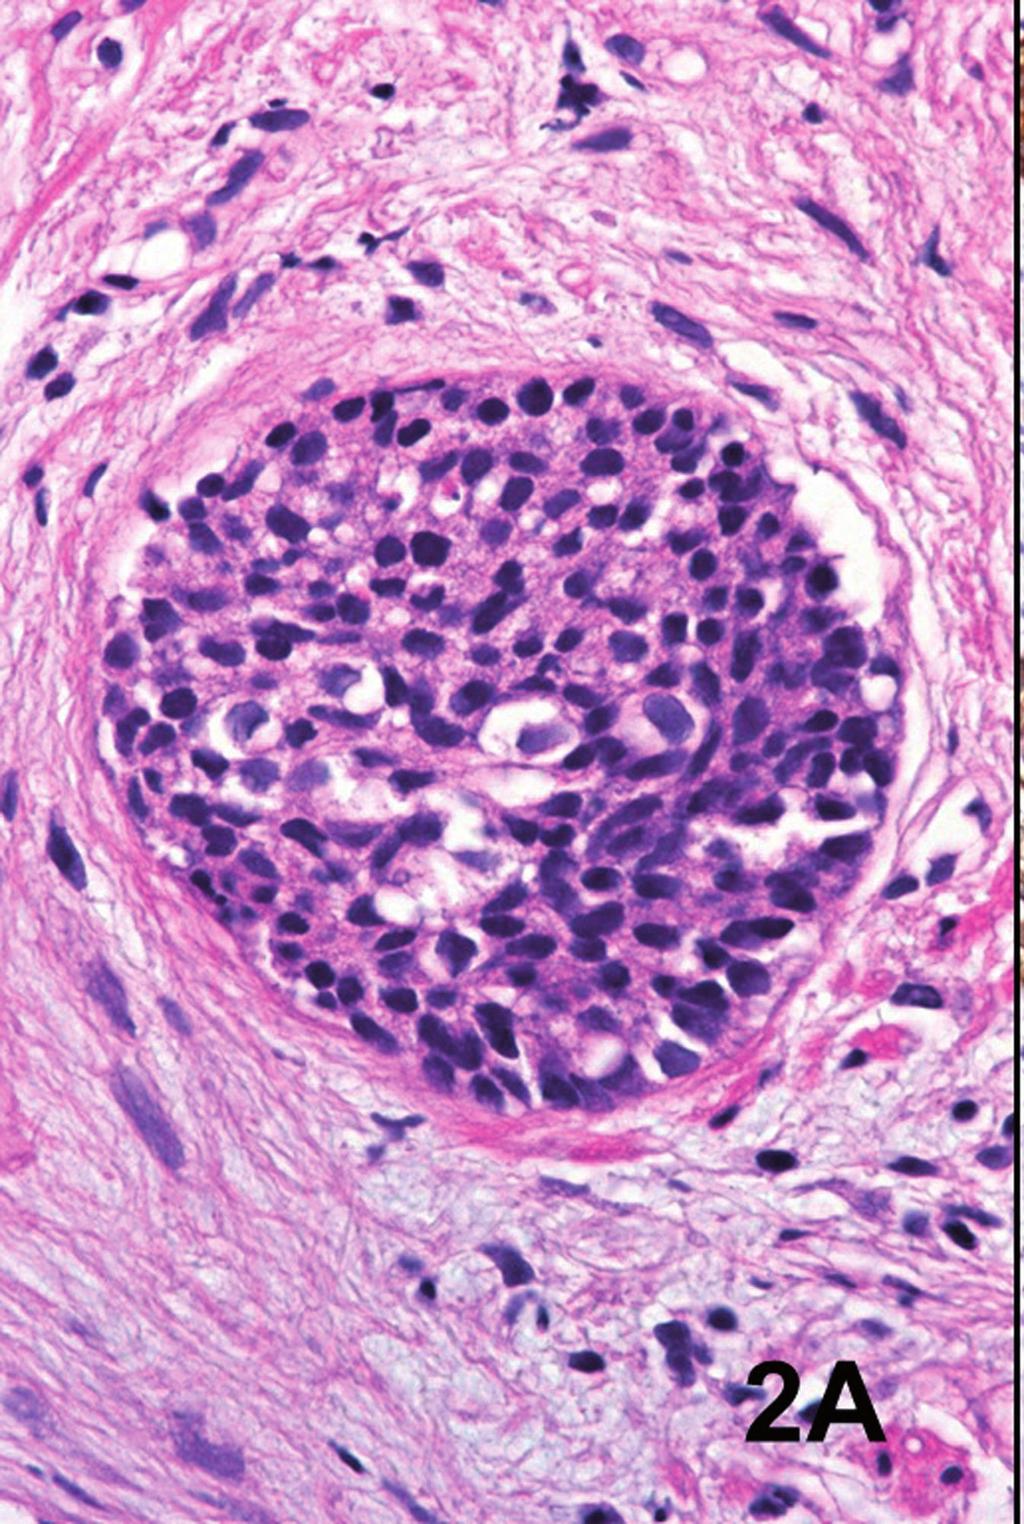 Areas with high-grade urothelial carcinoma were not found. In case one, the neoplasm infiltrated the lamina propria, and in case two the muscular layer.